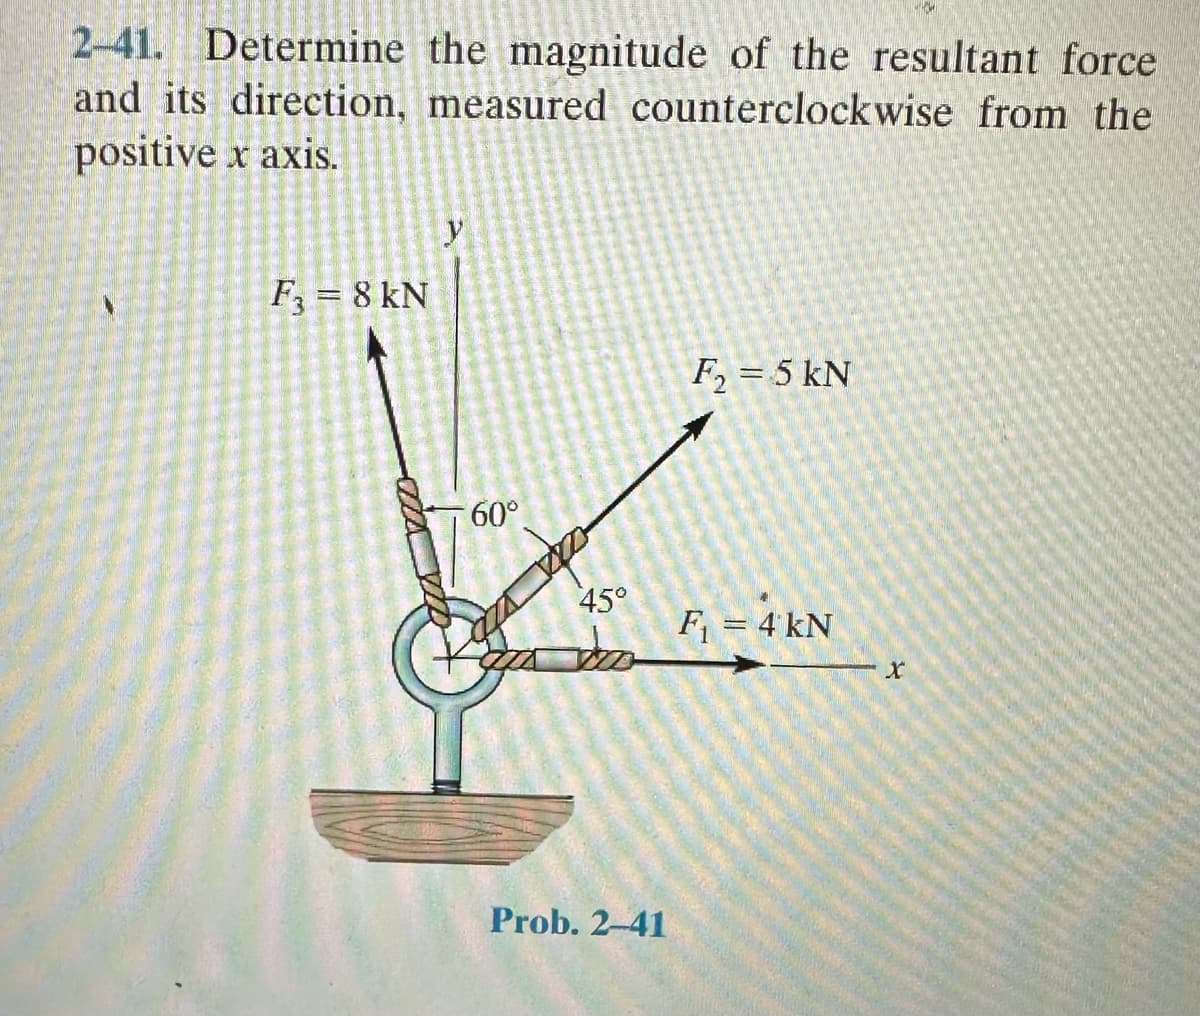 2-41. Determine the magnitude of the resultant force
and its direction, measured counterclockwise from the
positive x axis.
F3 = 8 kN
y
60°
45°
Prob. 2-41
F₂ = 5 kN
F₁ = 4 kN